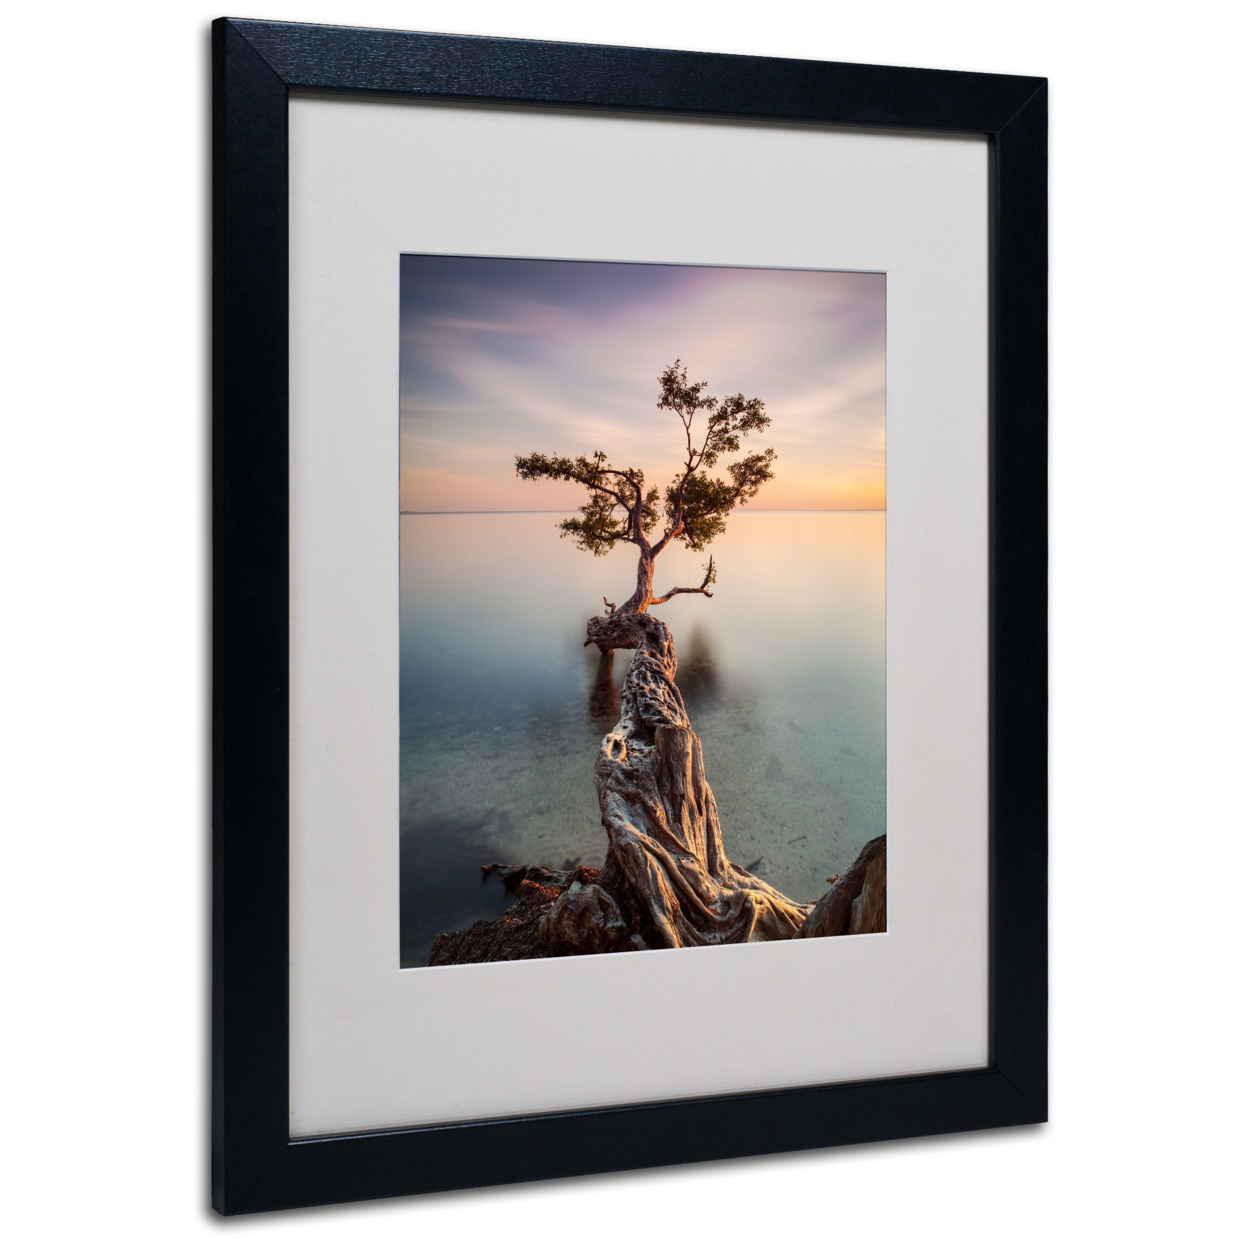 Moises Levy 'Water Tree III' Black Wooden Framed Art 18 X 22 Inches